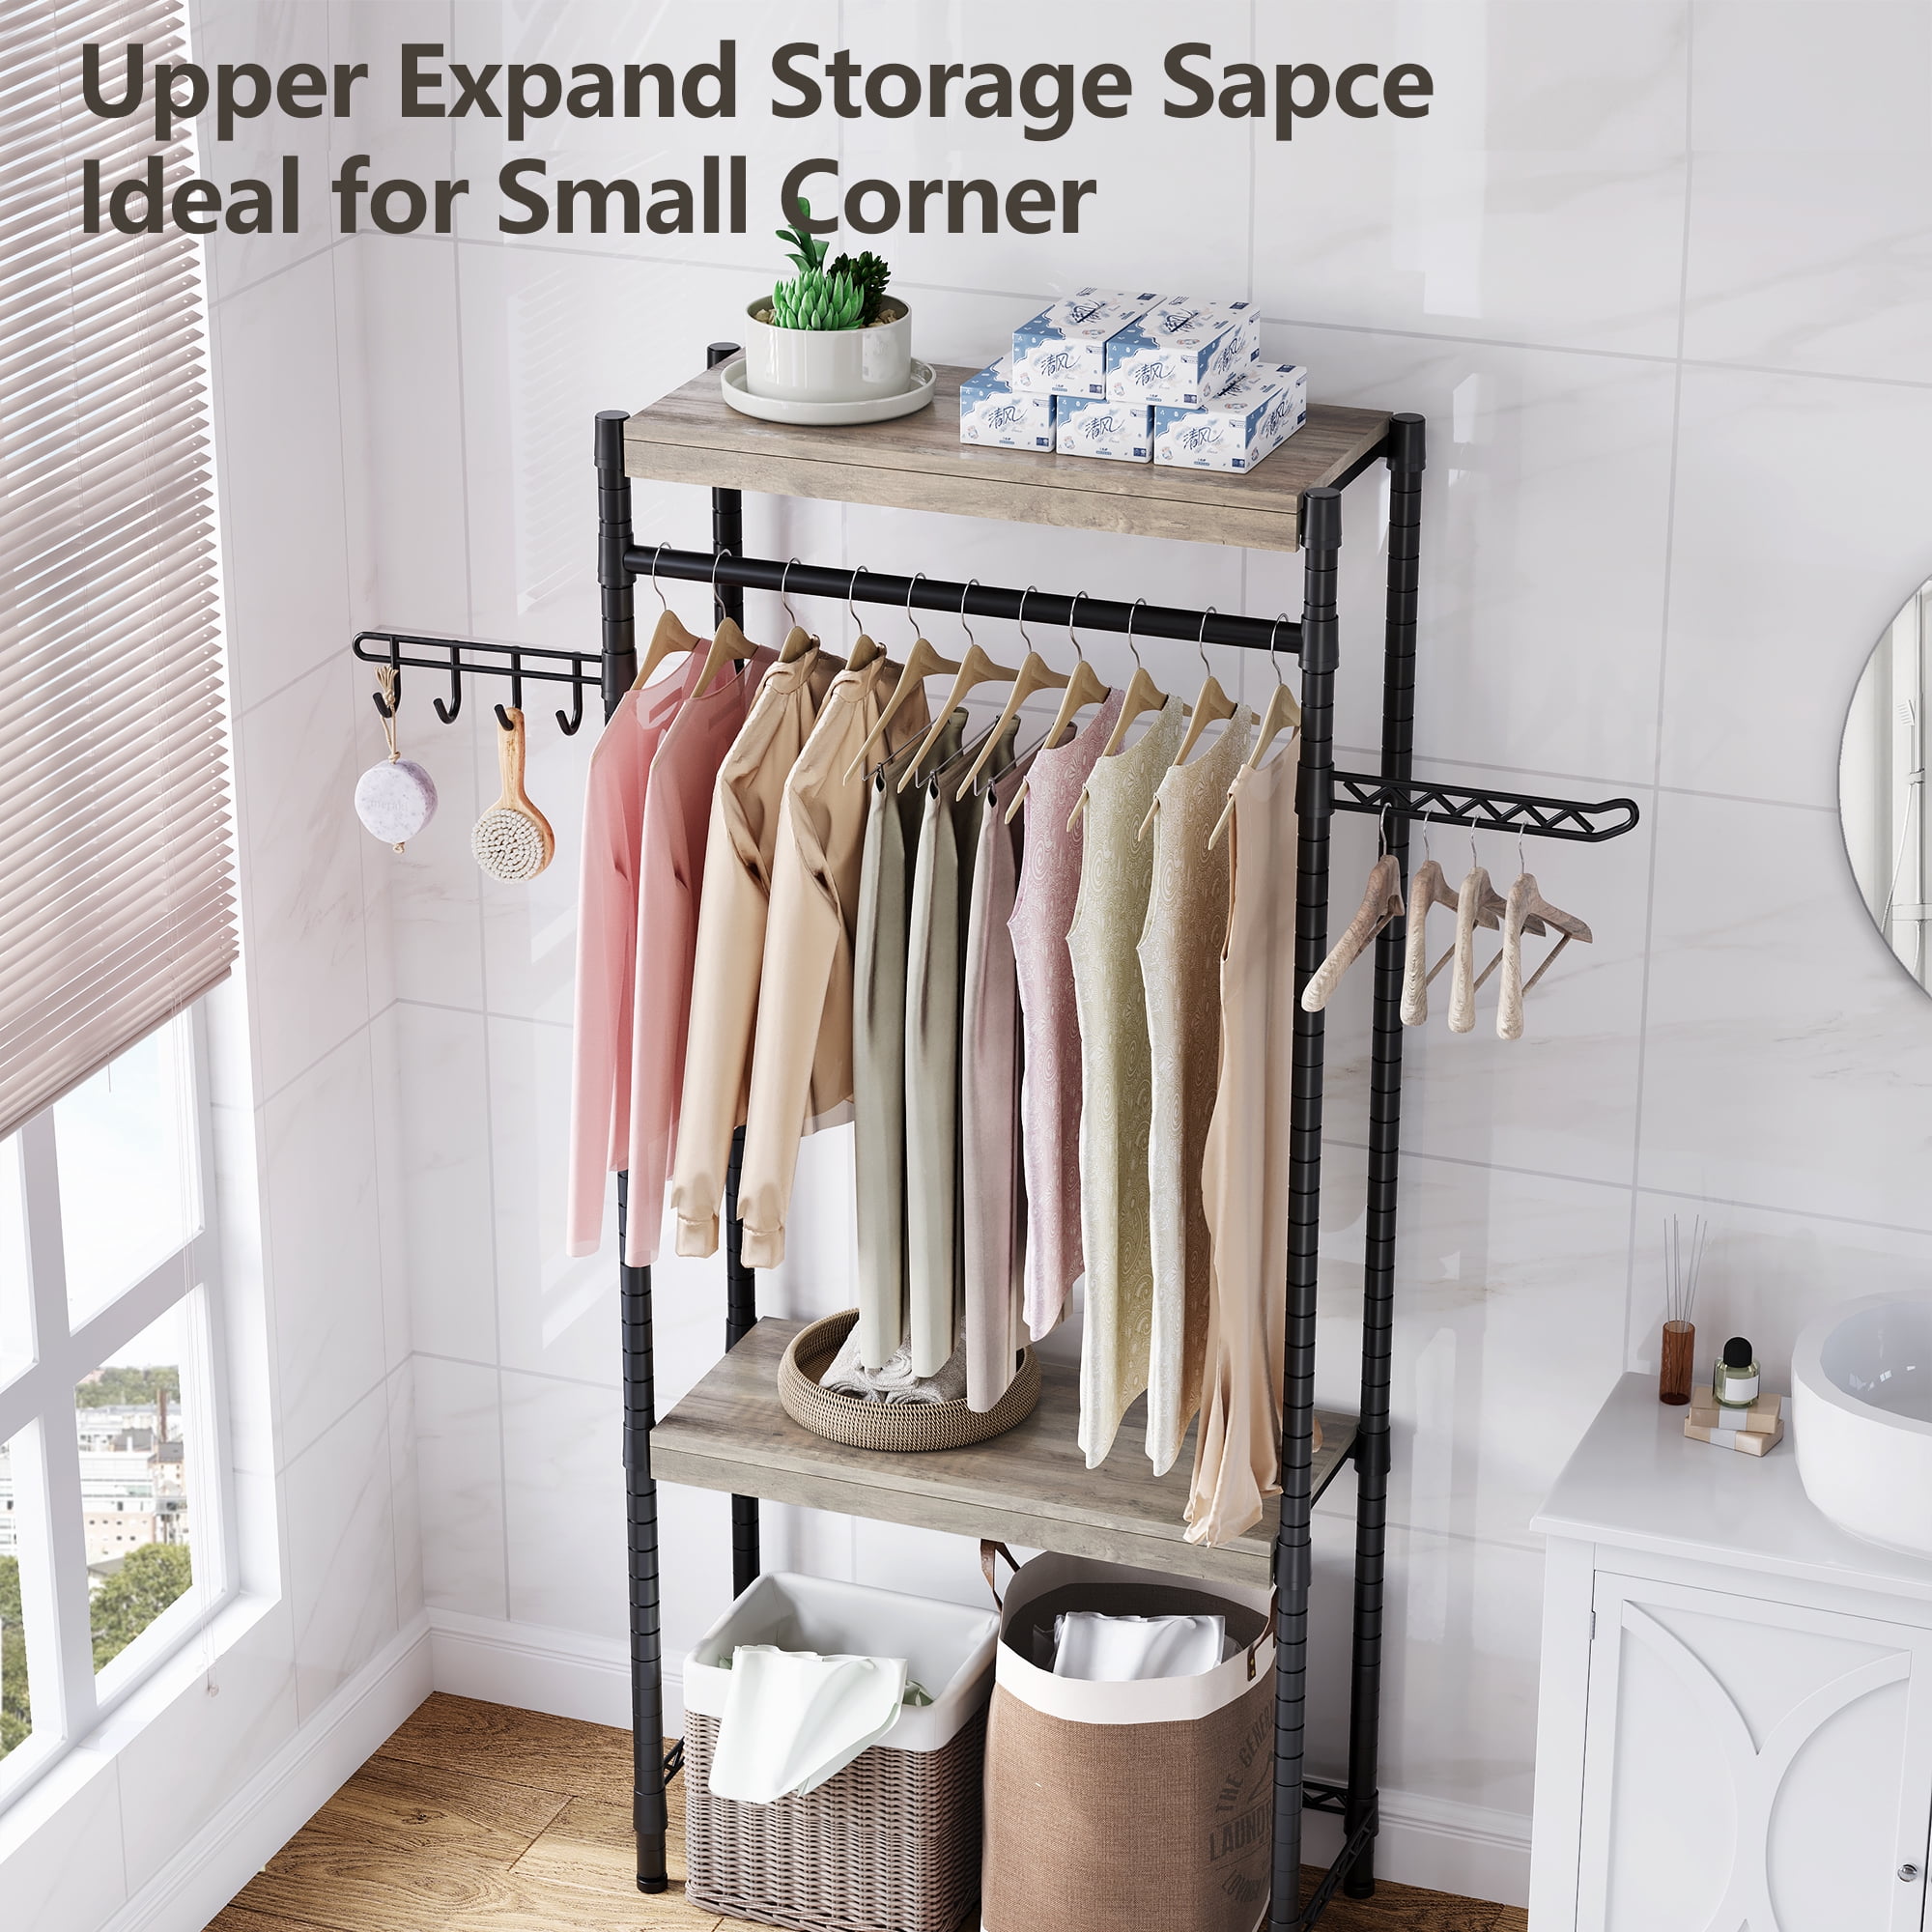 Dropship The Washer And Dryer Storage Shelf, , Bathroom Space Saving Rack,  Closet Organizer Metal Garment Rack Portable Clothes Hanger Home Shelf to  Sell Online at a Lower Price